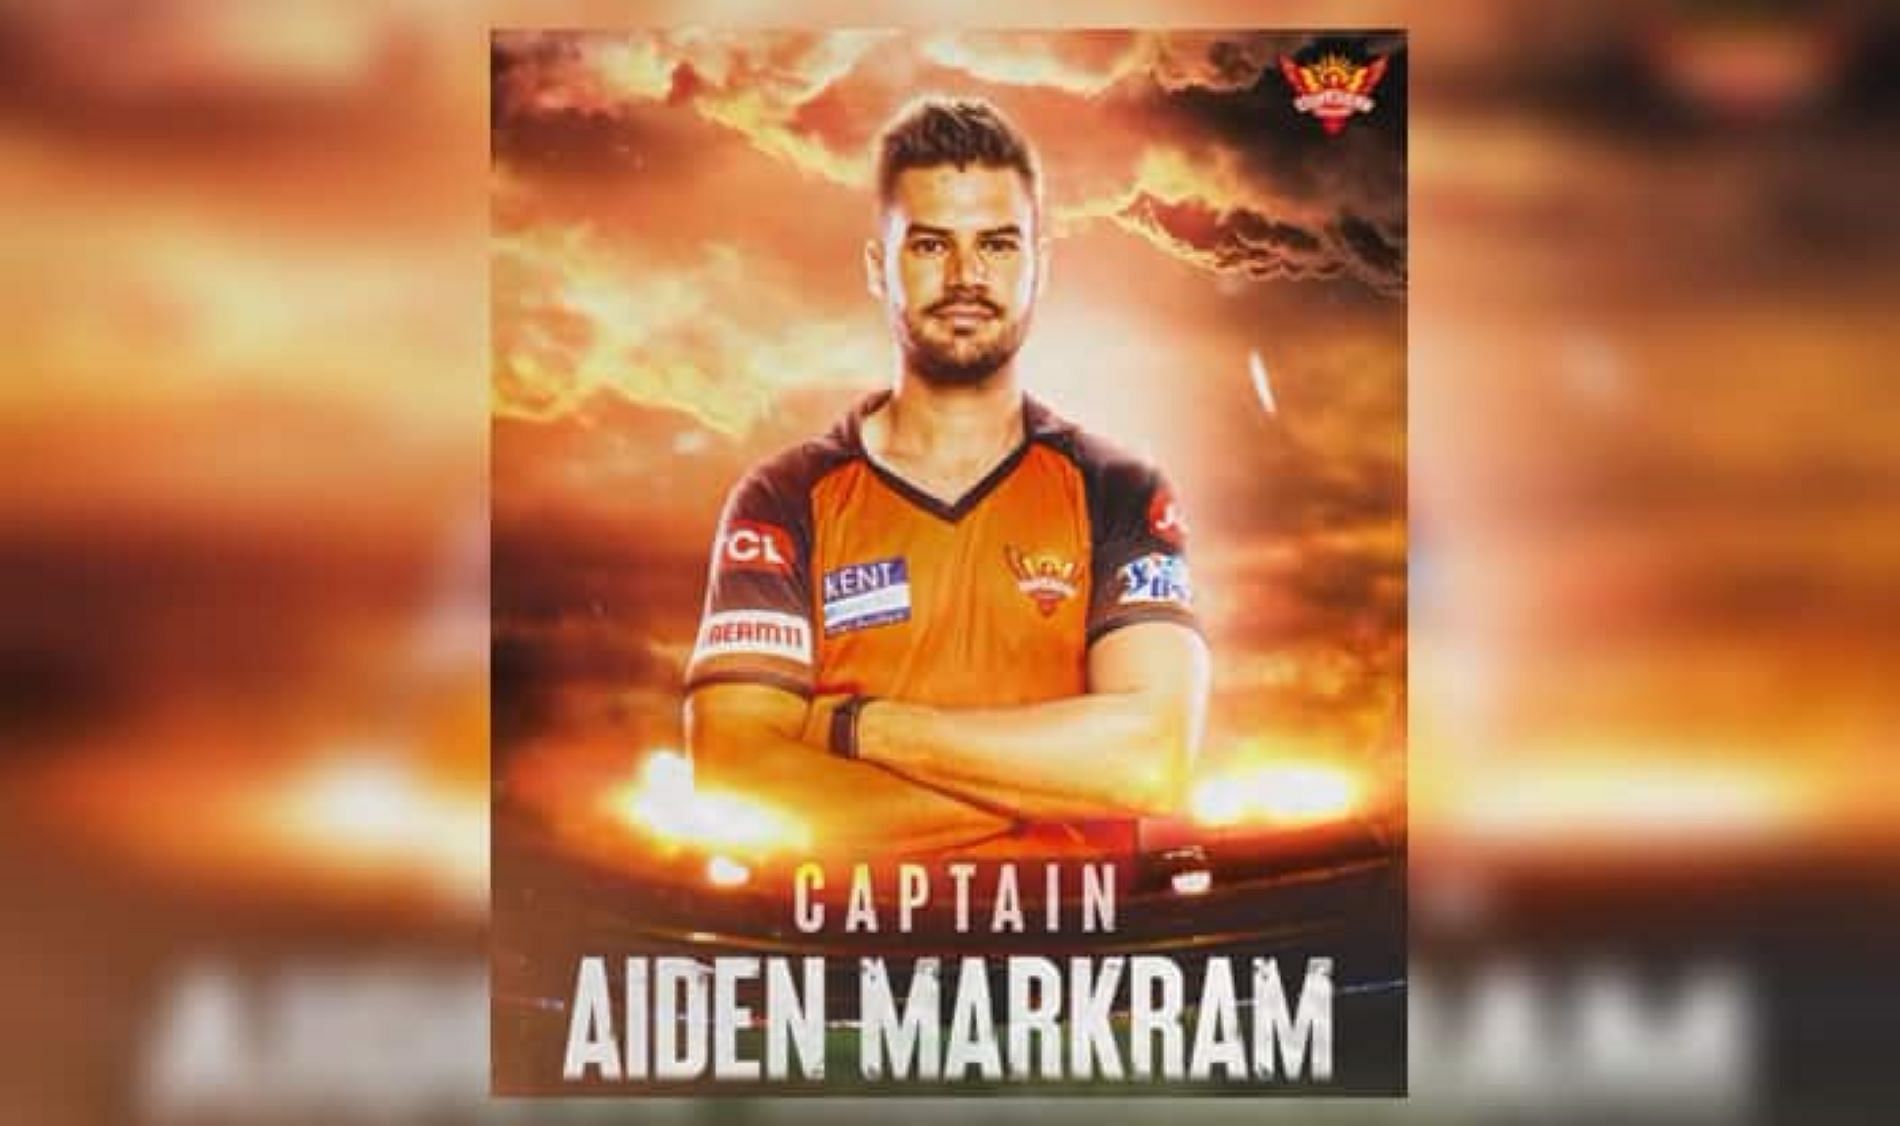 Markram looks to carry forward his Captaincy success in the recent SA T20 for SRH.